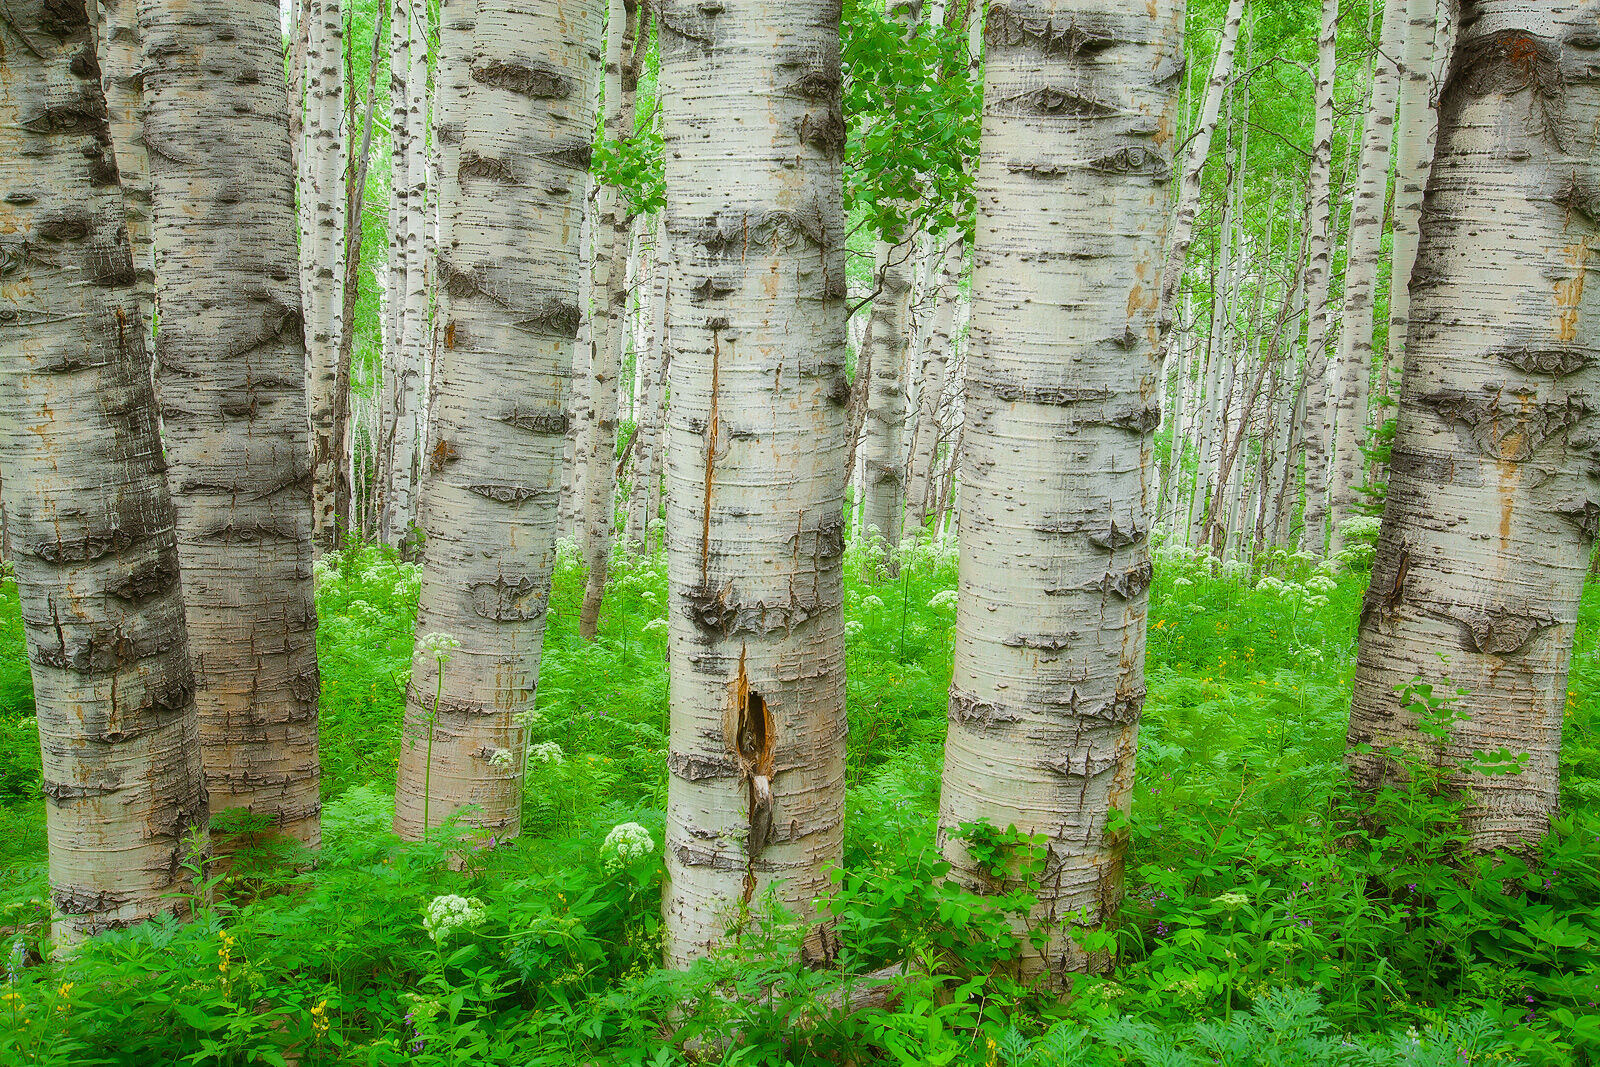 White aspen tree trunks are show close up with green ferns on the forest floor.  They appear to be old and show many scars. 